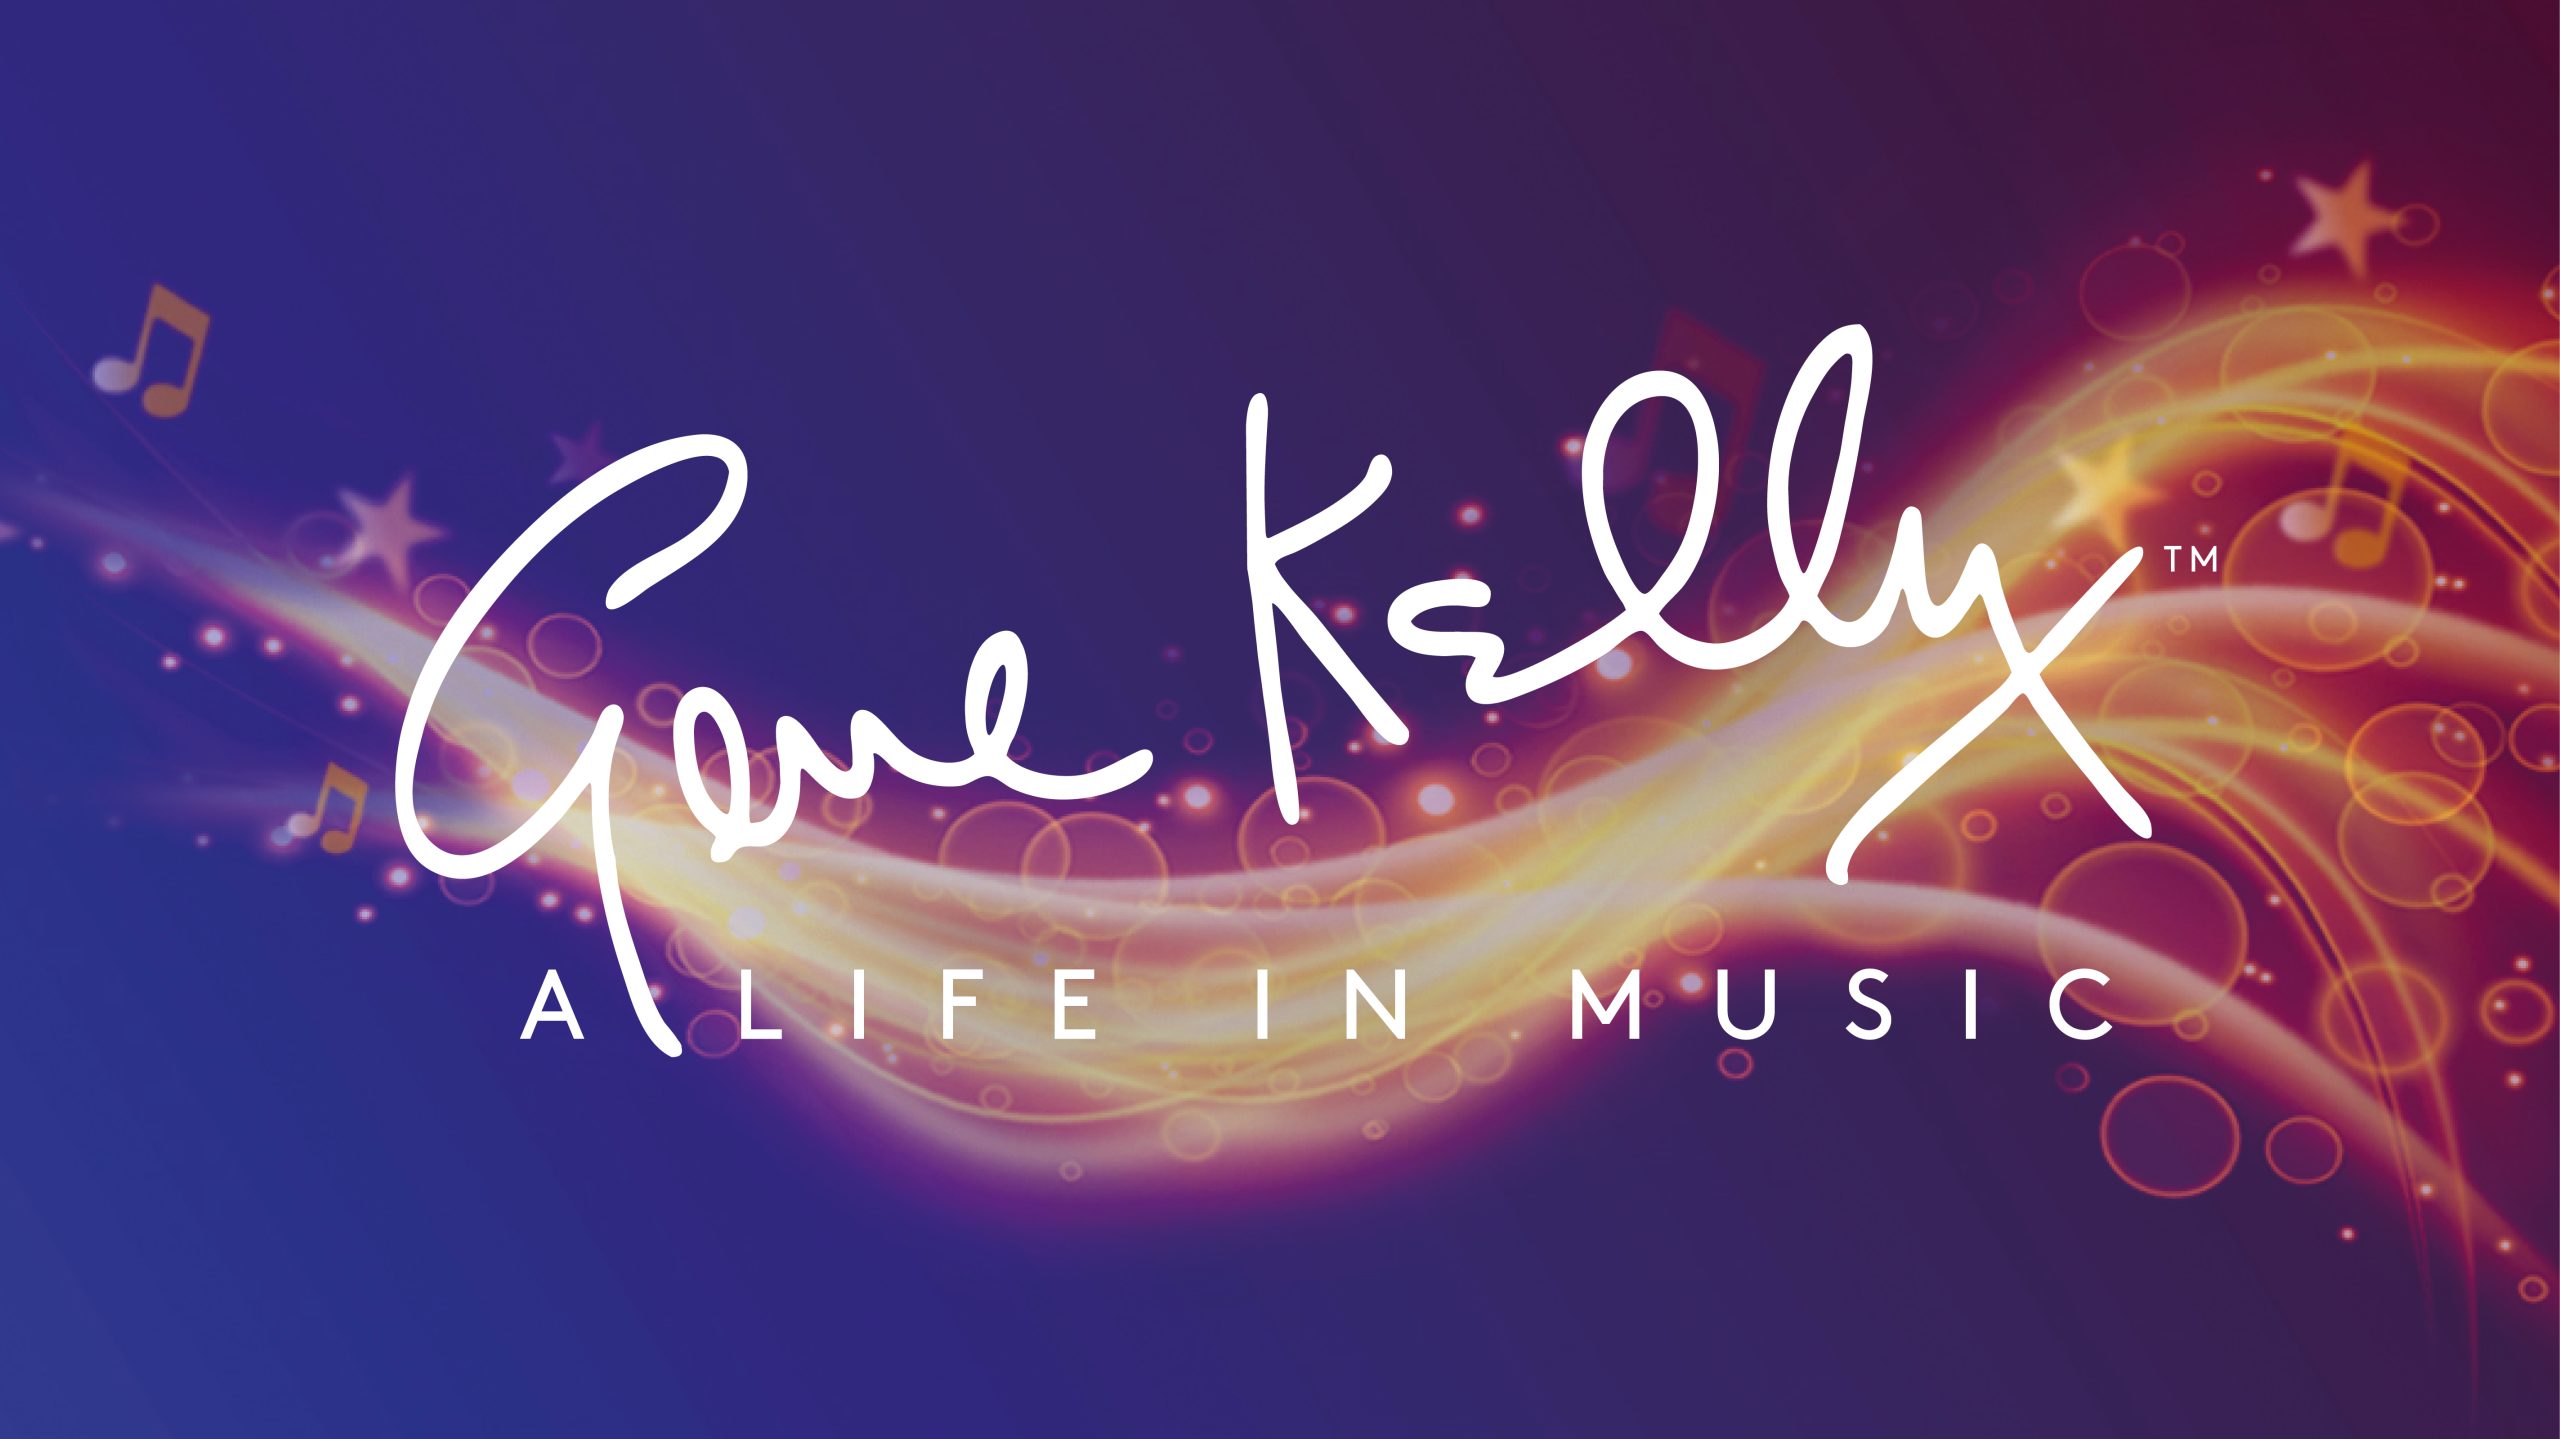 Gene Kelly: A Life in Music presented by Seattle Symphony